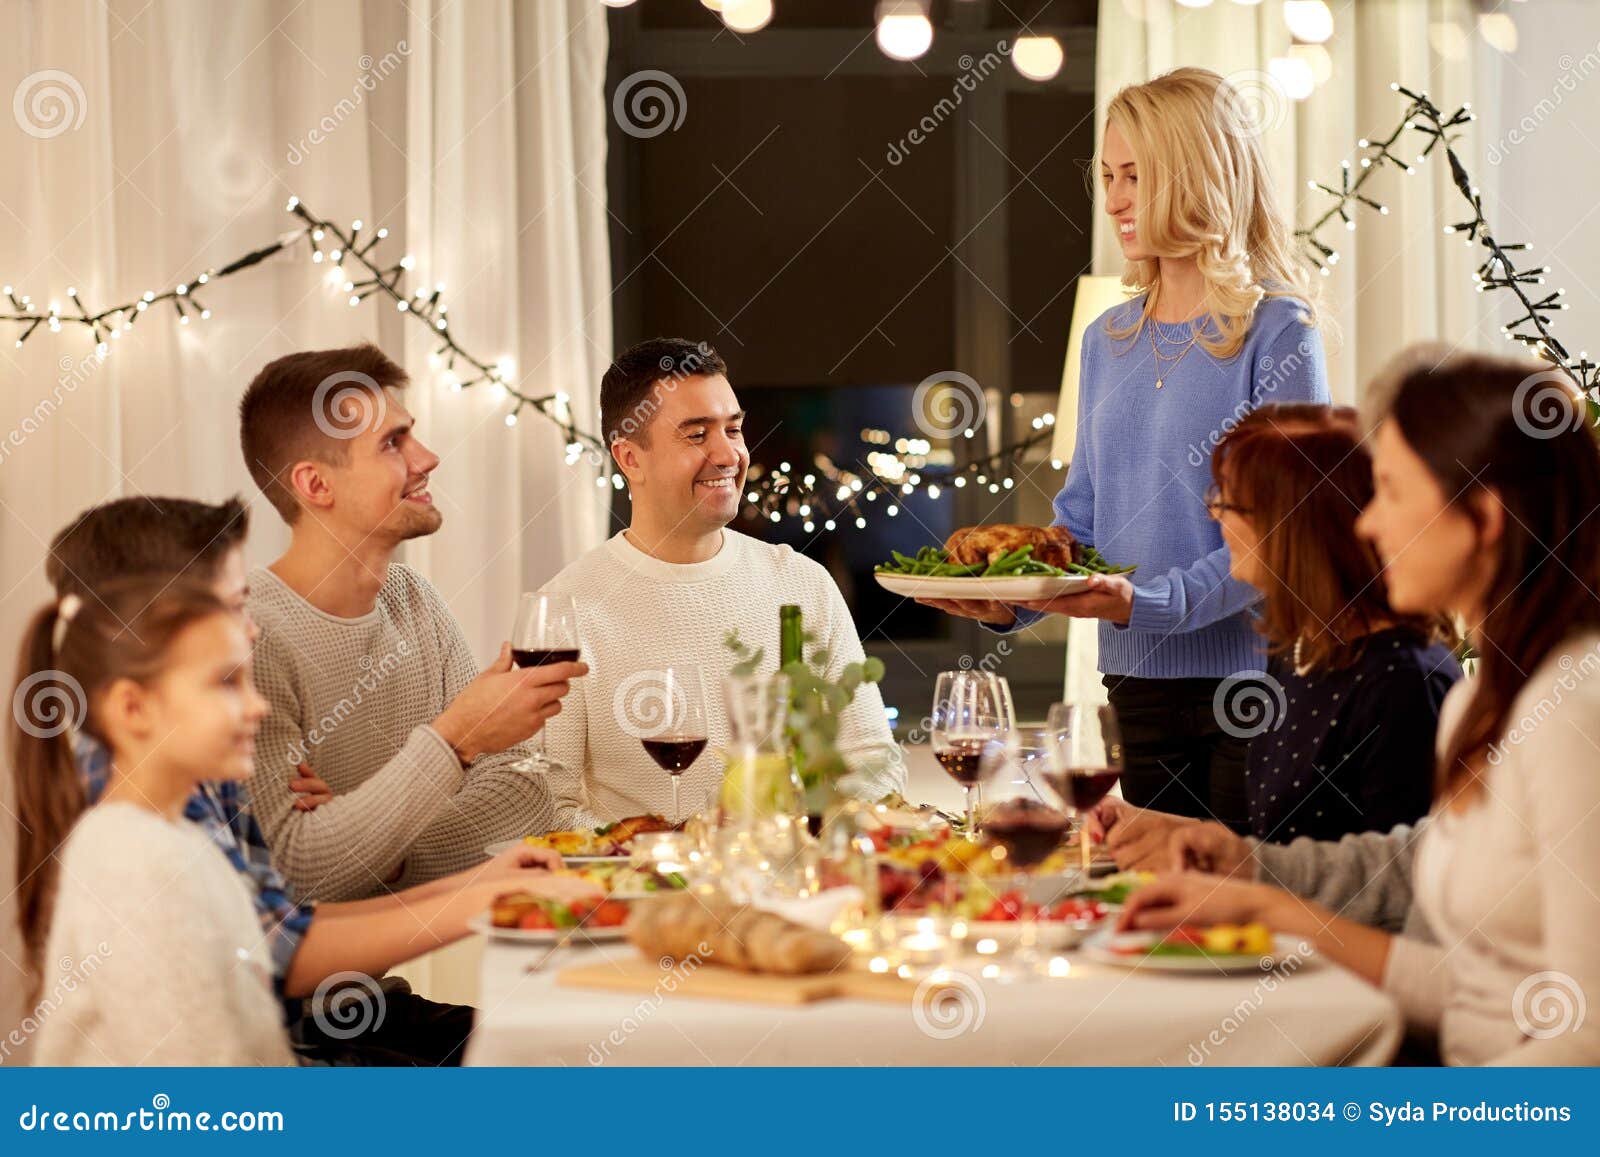 Happy Family Having Dinner Party at Home Stock Photo - Image of party